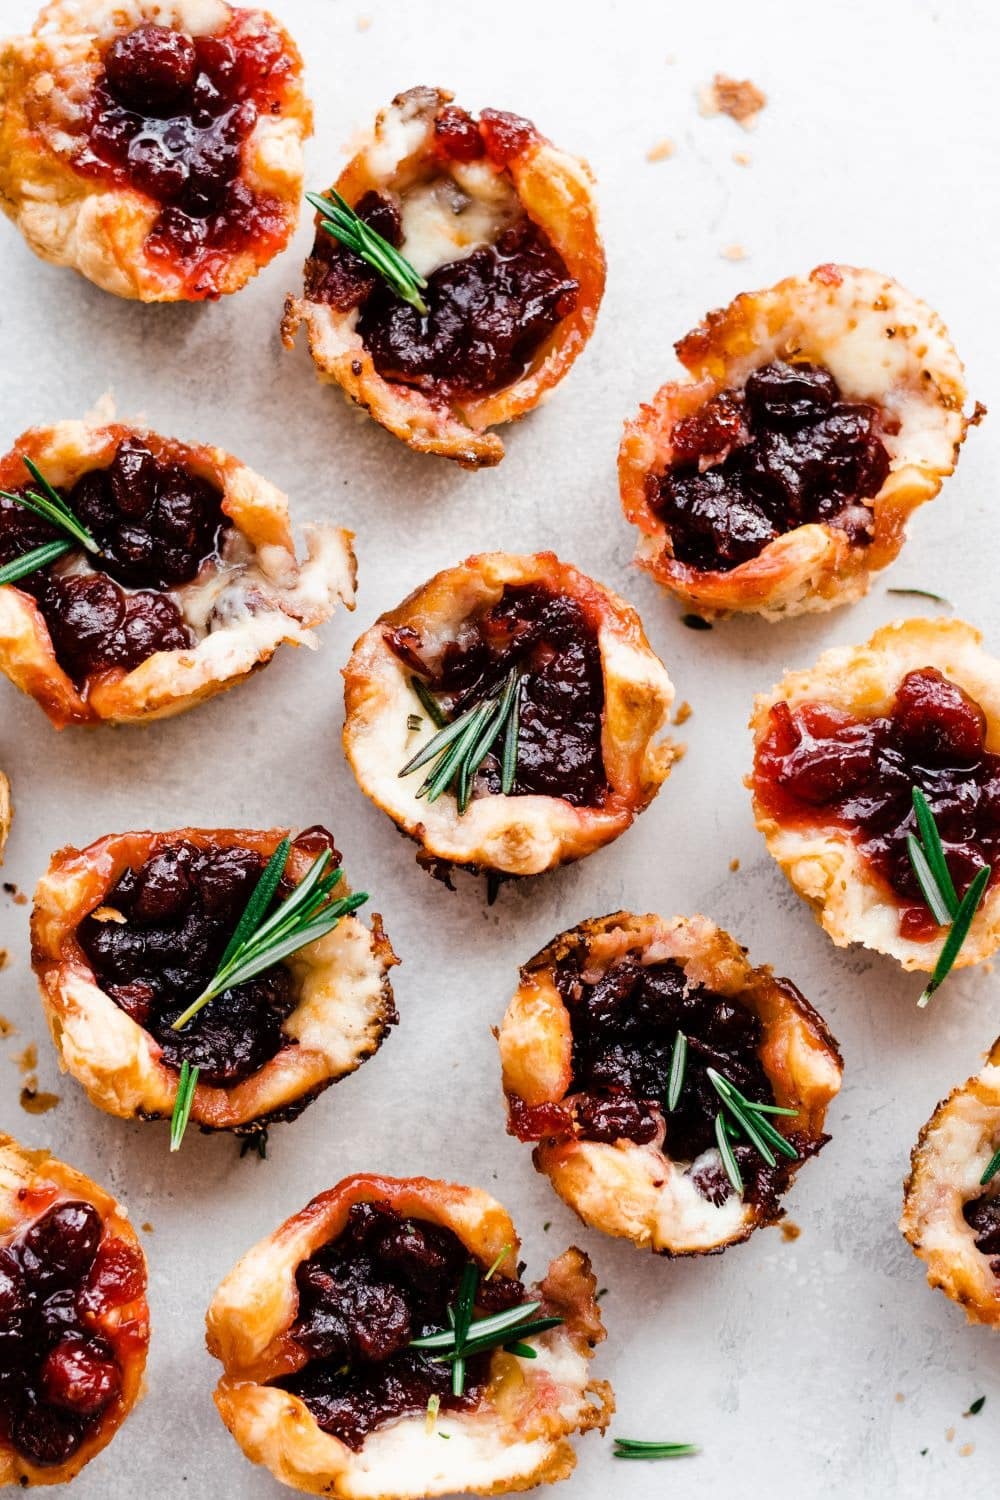 Bunch of cranberry brie bites arranged on a white table garnished with rosemary leaves.